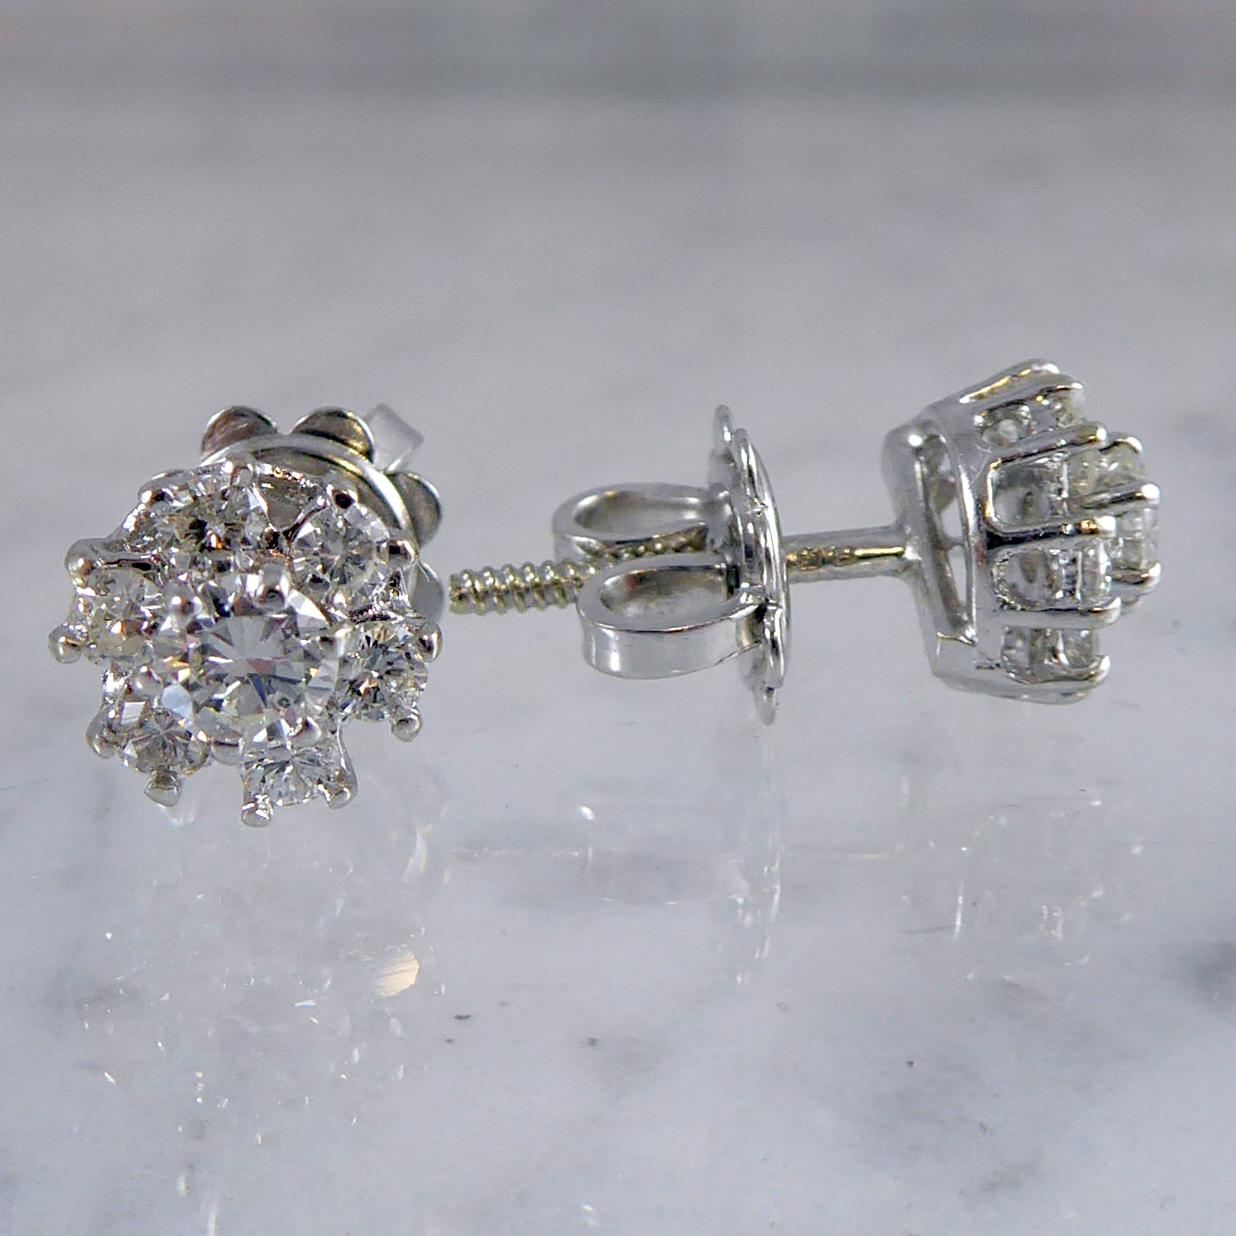 A very pretty pair of vintage diamond earrings featuring seven brilliant cut diamonds to each ear stud in white claw settings to a basket style mount.  White gold posts with screw thread fittings and white butterflies for pierced ears only. 